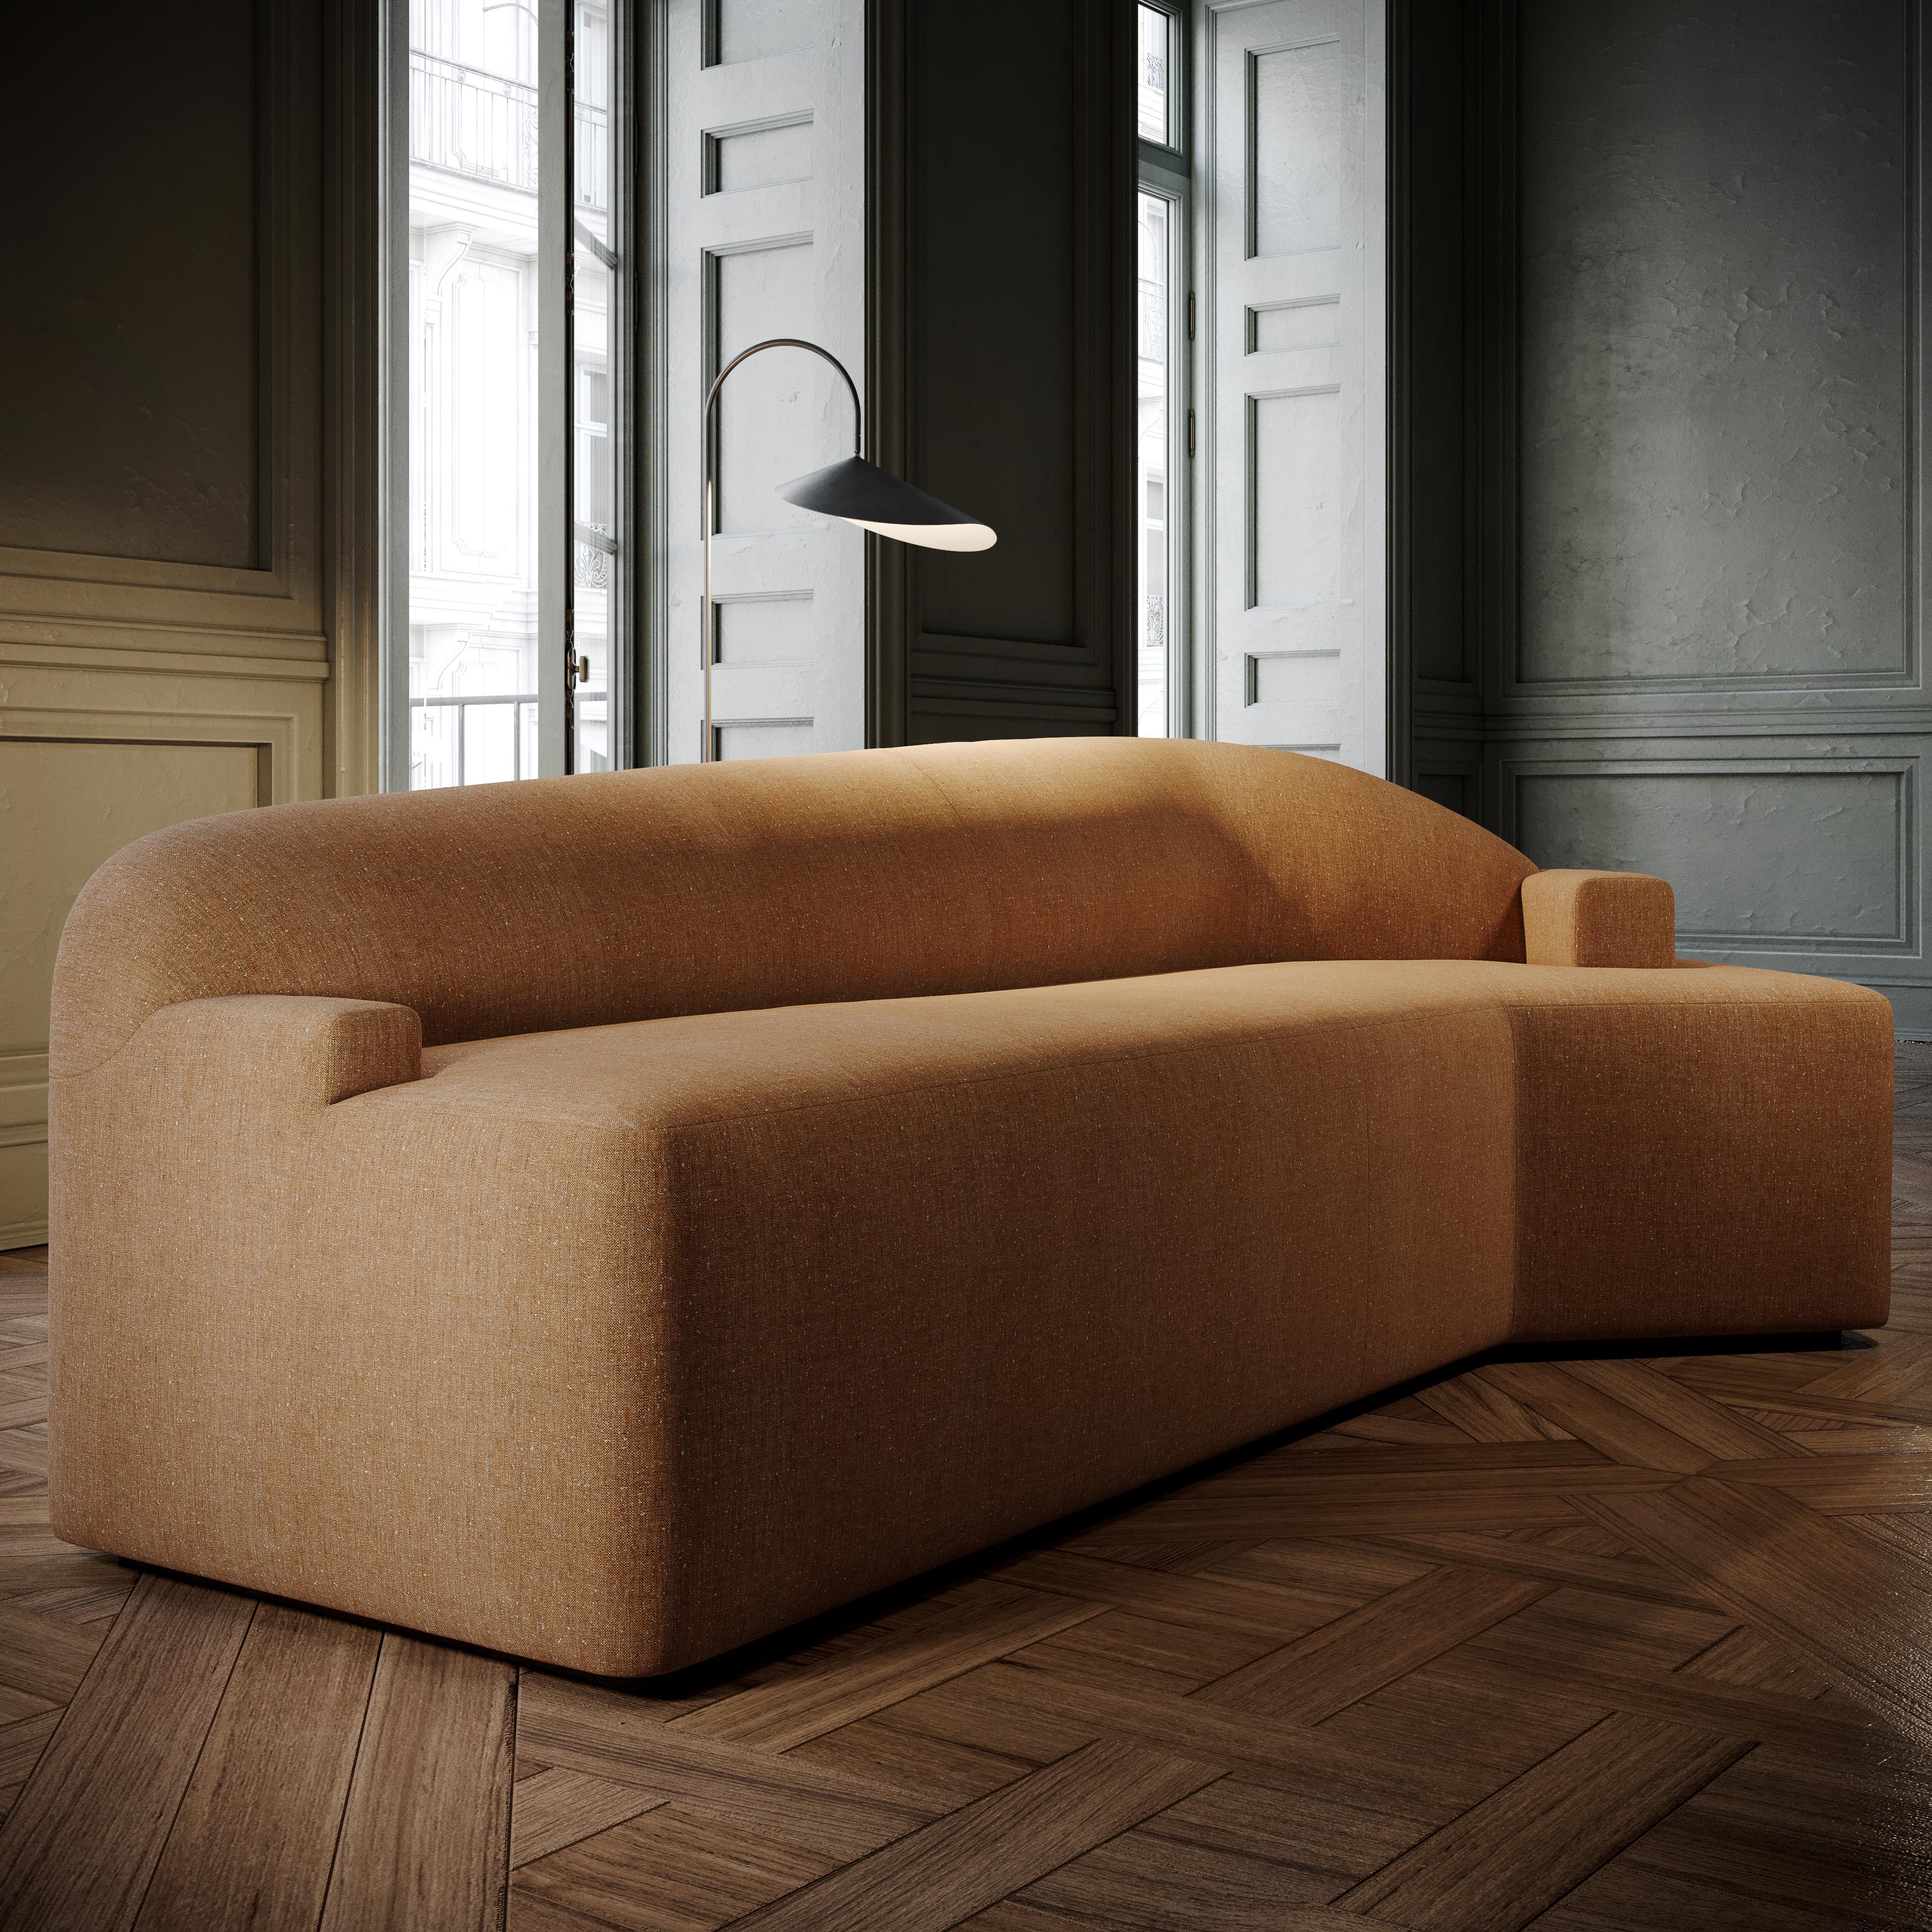 The Gil Melott Bespoke customizable bench made sofa known as 